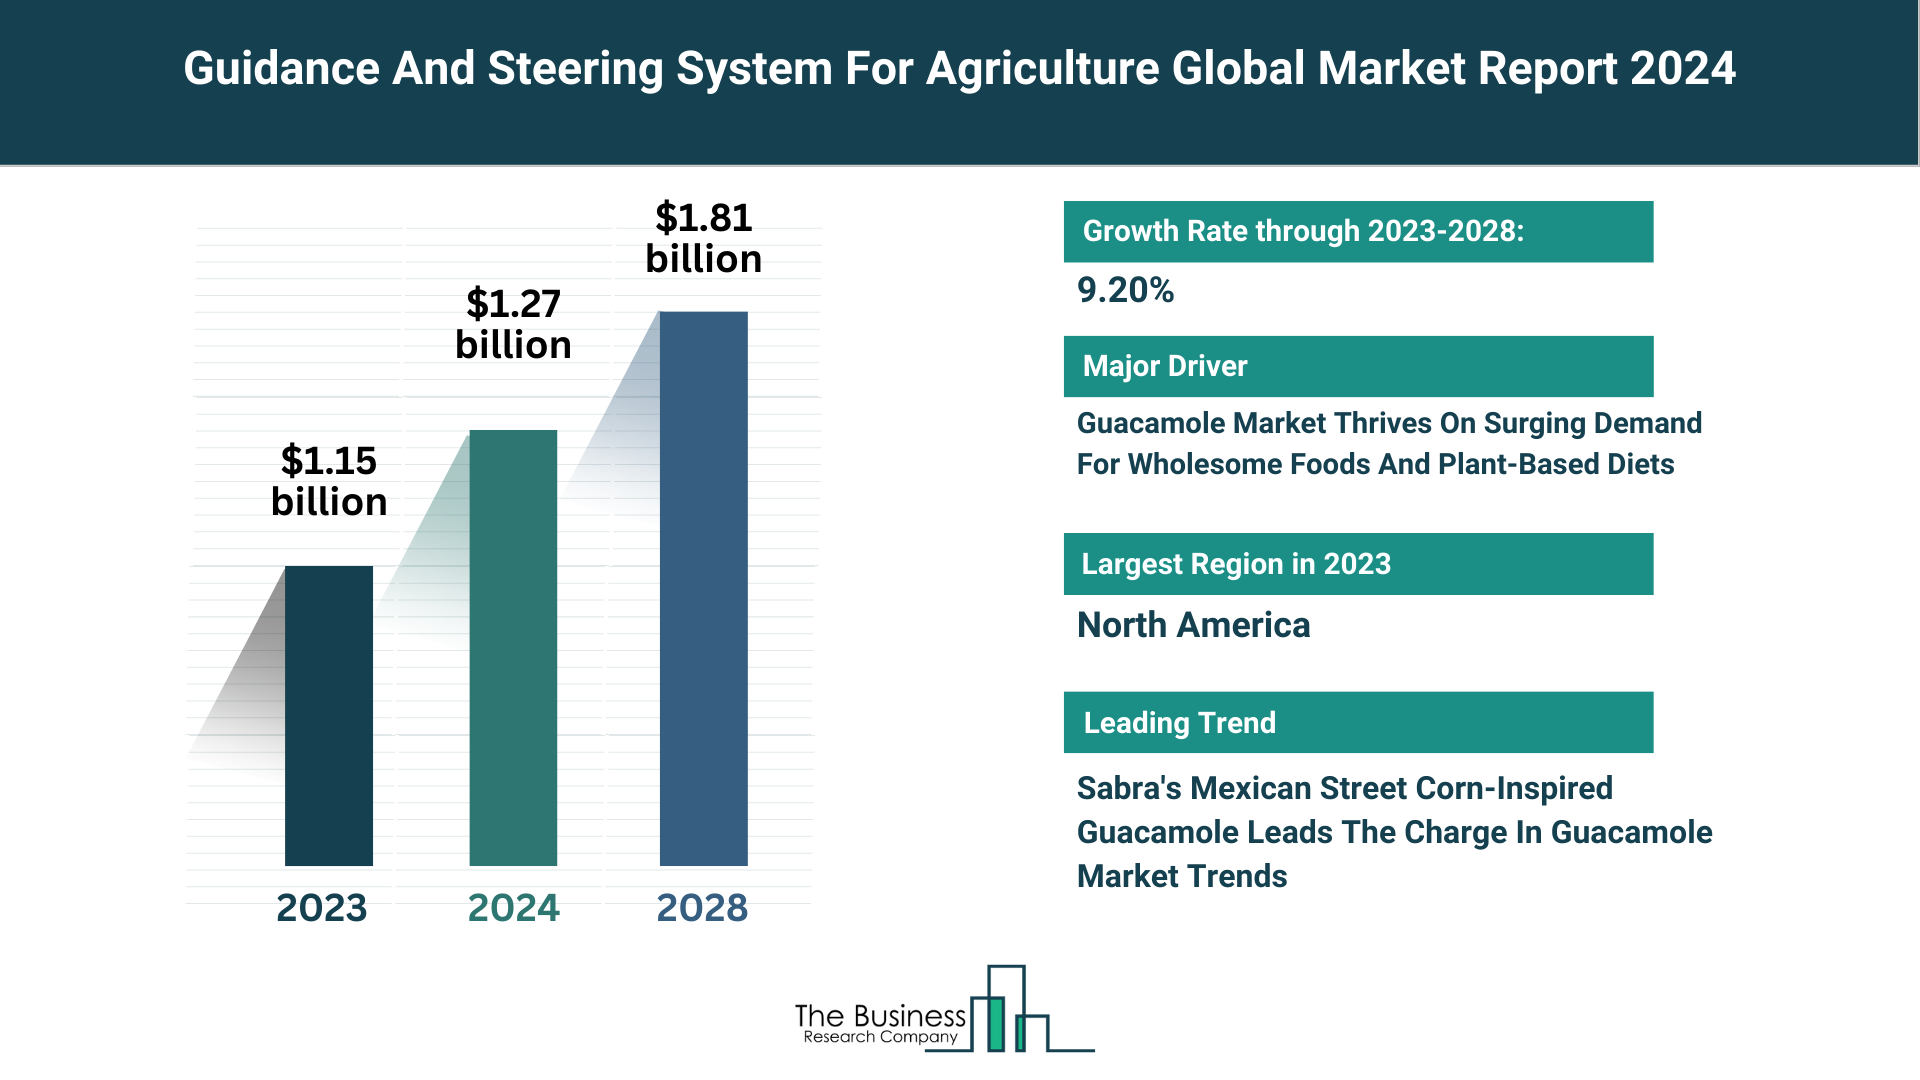 Global Guidance And Steering System For Agriculture Market